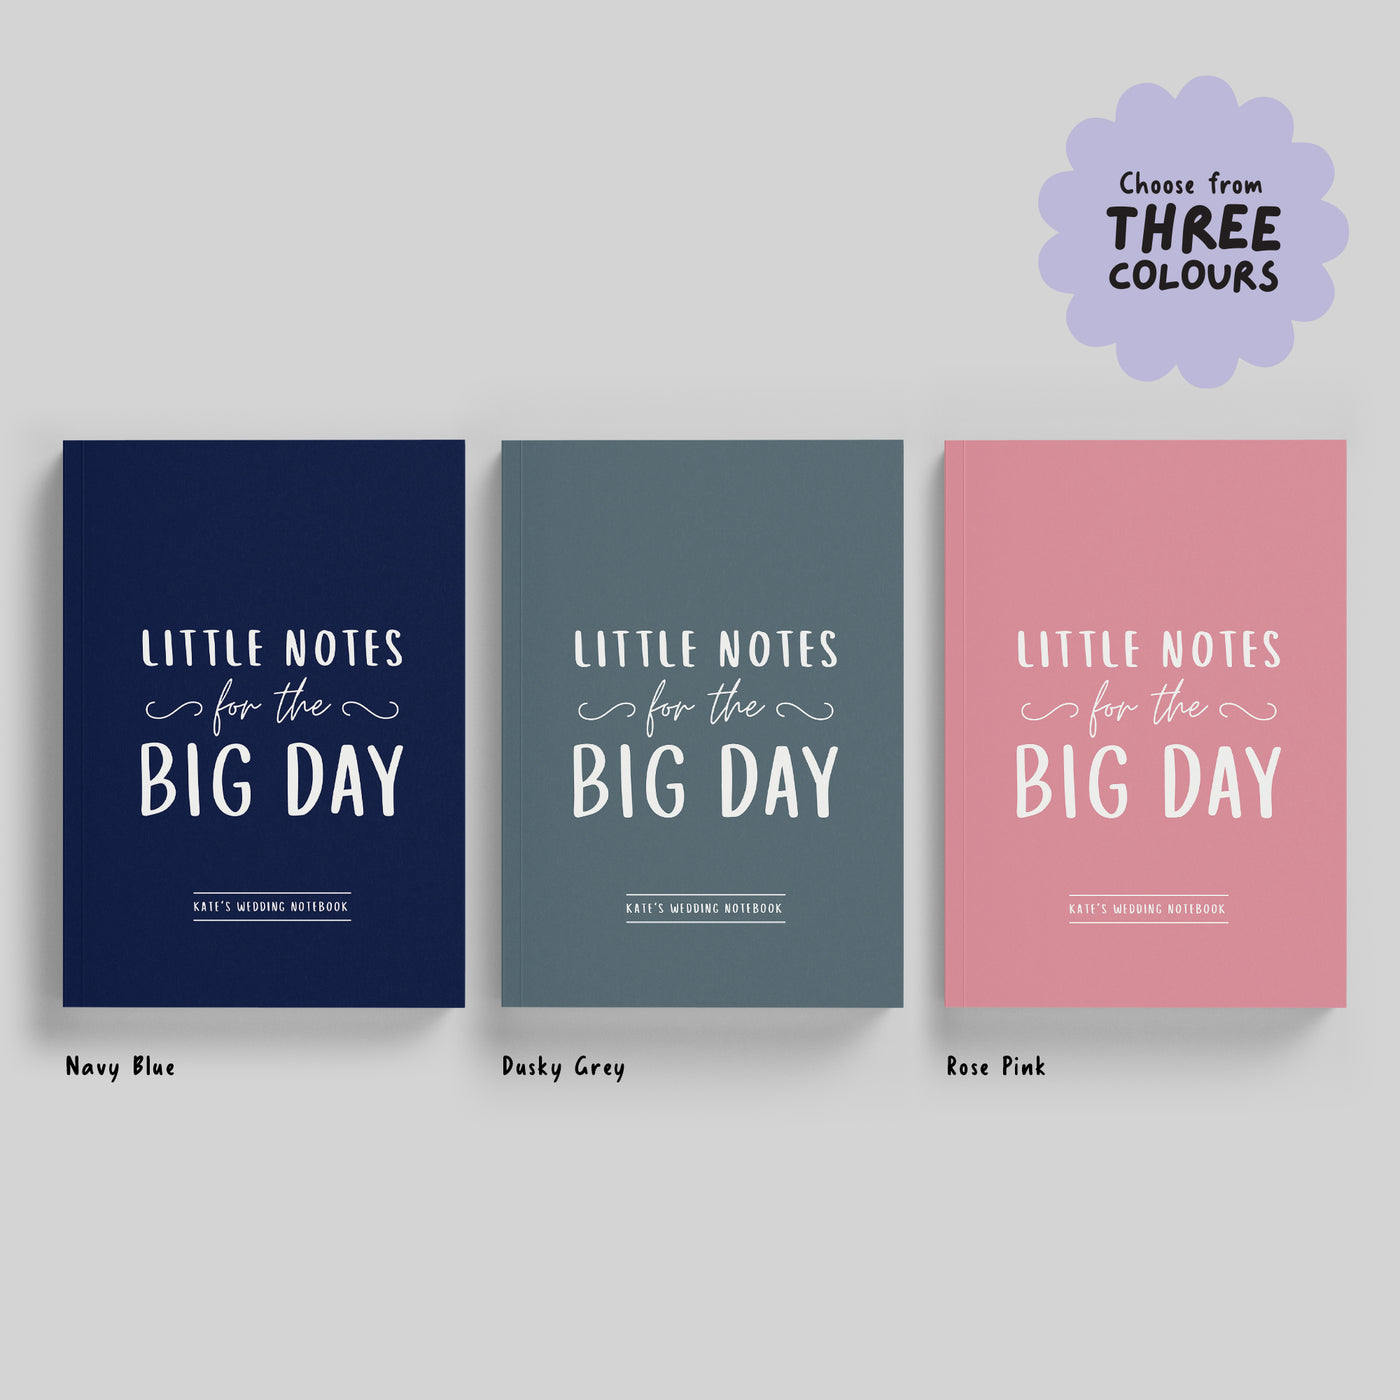 Little Notes for the Big Day Hardback Notebook (A5)